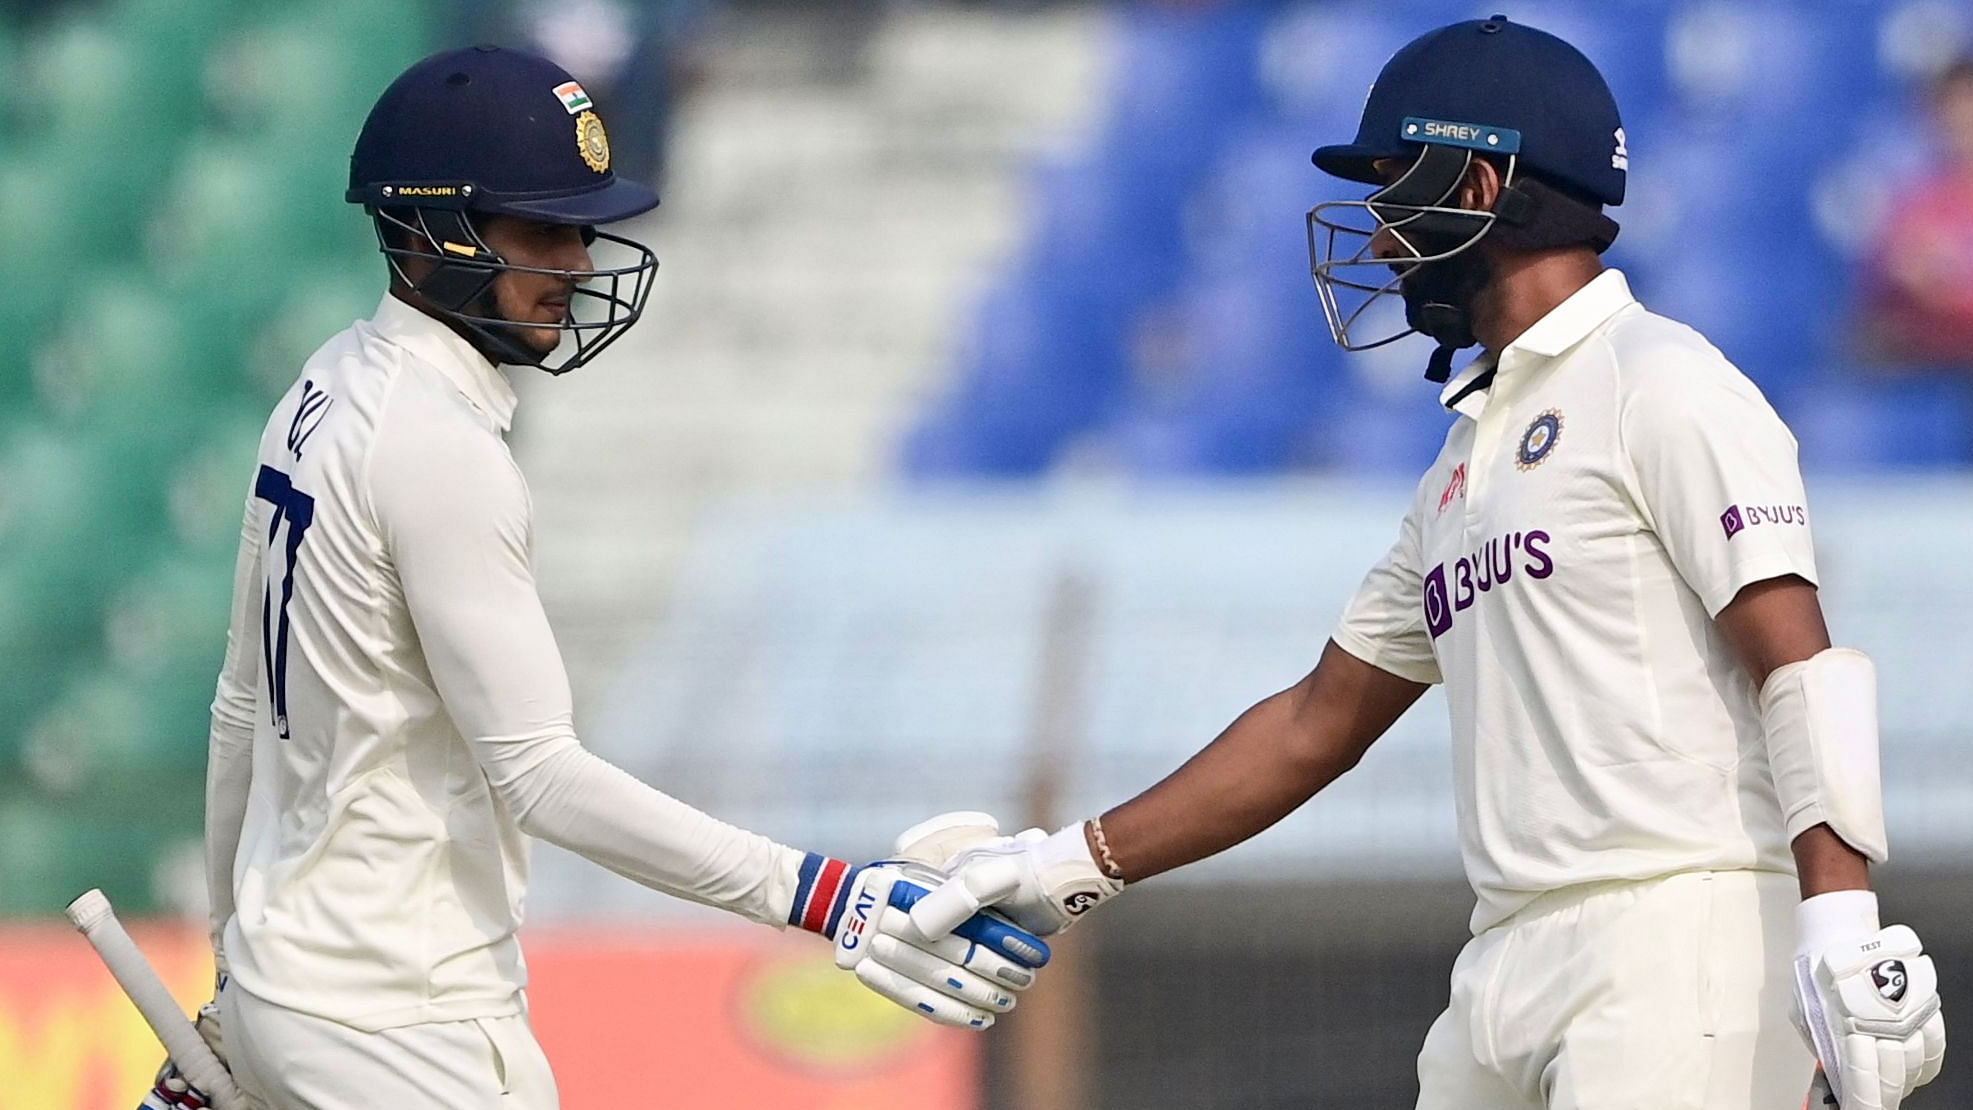 India’s Shubman Gill (L) shakes hand with his teammate Cheteshwar Pujara (R) after scoring a half century. Credit: AFP Photos